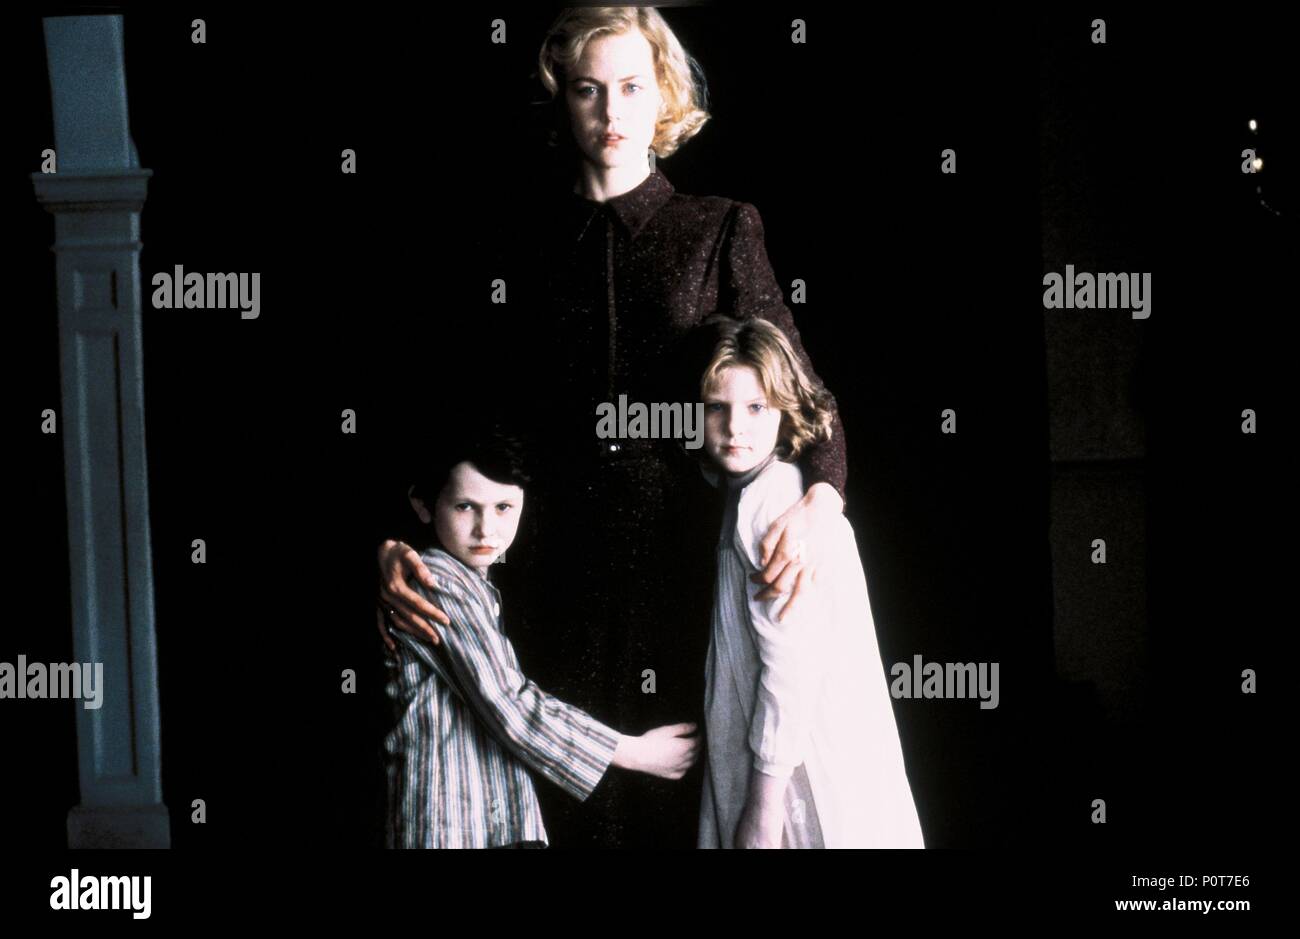 Original Film Title: THE OTHERS.  English Title: THE OTHERS.  Film Director: ALEJANDRO AMENABAR.  Year: 2001.  Stars: NICOLE KIDMAN; ALAKINA MANN; JAMES BENTLEY. Copyright: Editorial inside use only. This is a publicly distributed handout. Access rights only, no license of copyright provided. Mandatory authorization to Visual Icon (www.visual-icon.com) is required for the reproduction of this image. Credit: DIMENSION FILMS / ISASI, TERESA / Album Stock Photo